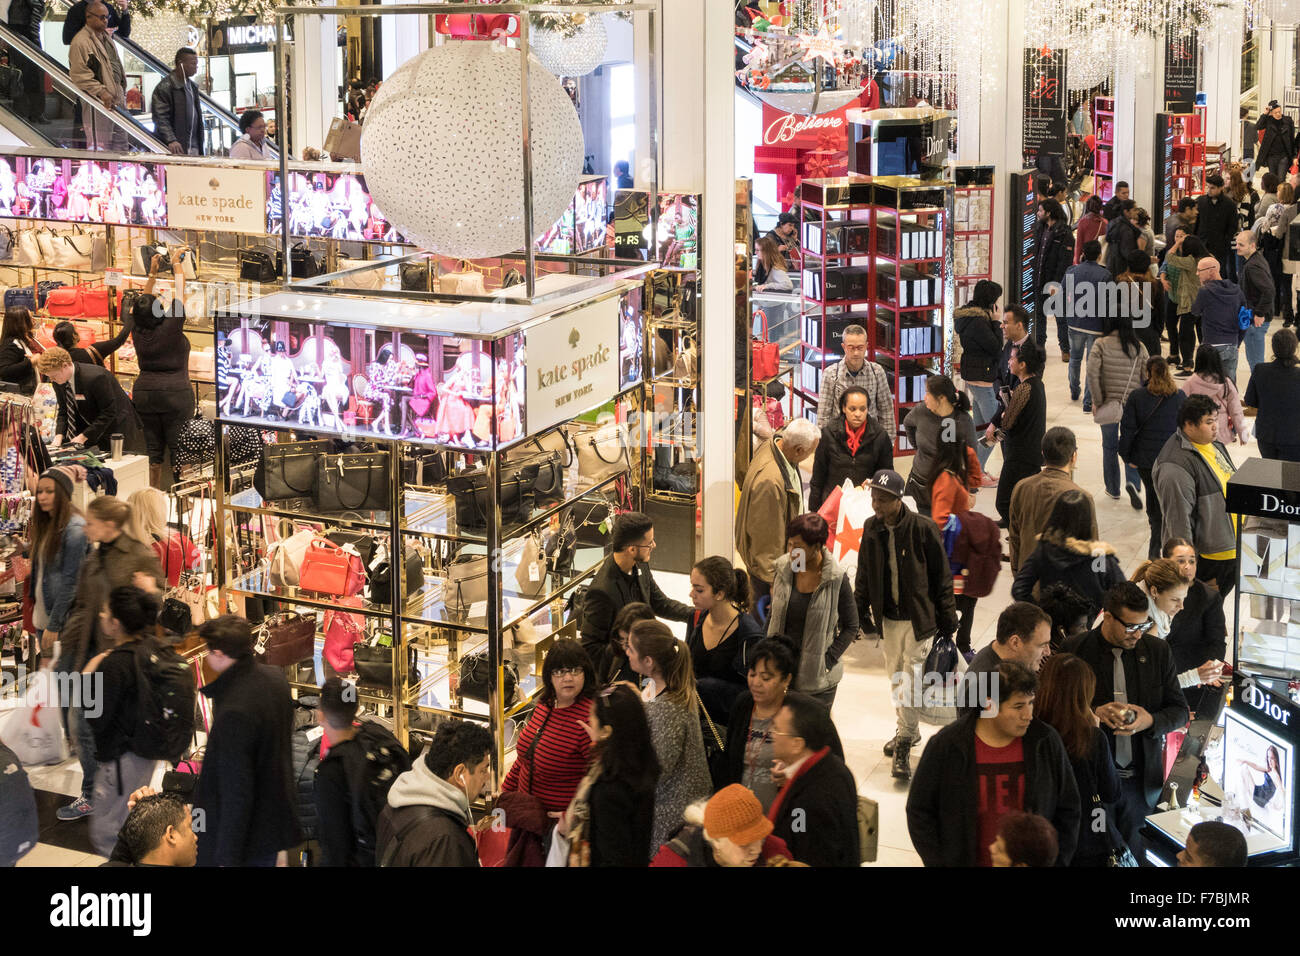 Crowds Shopping at Macy's Flagship Department Store in Herald Square on Black Friday, NYC Stock Photo